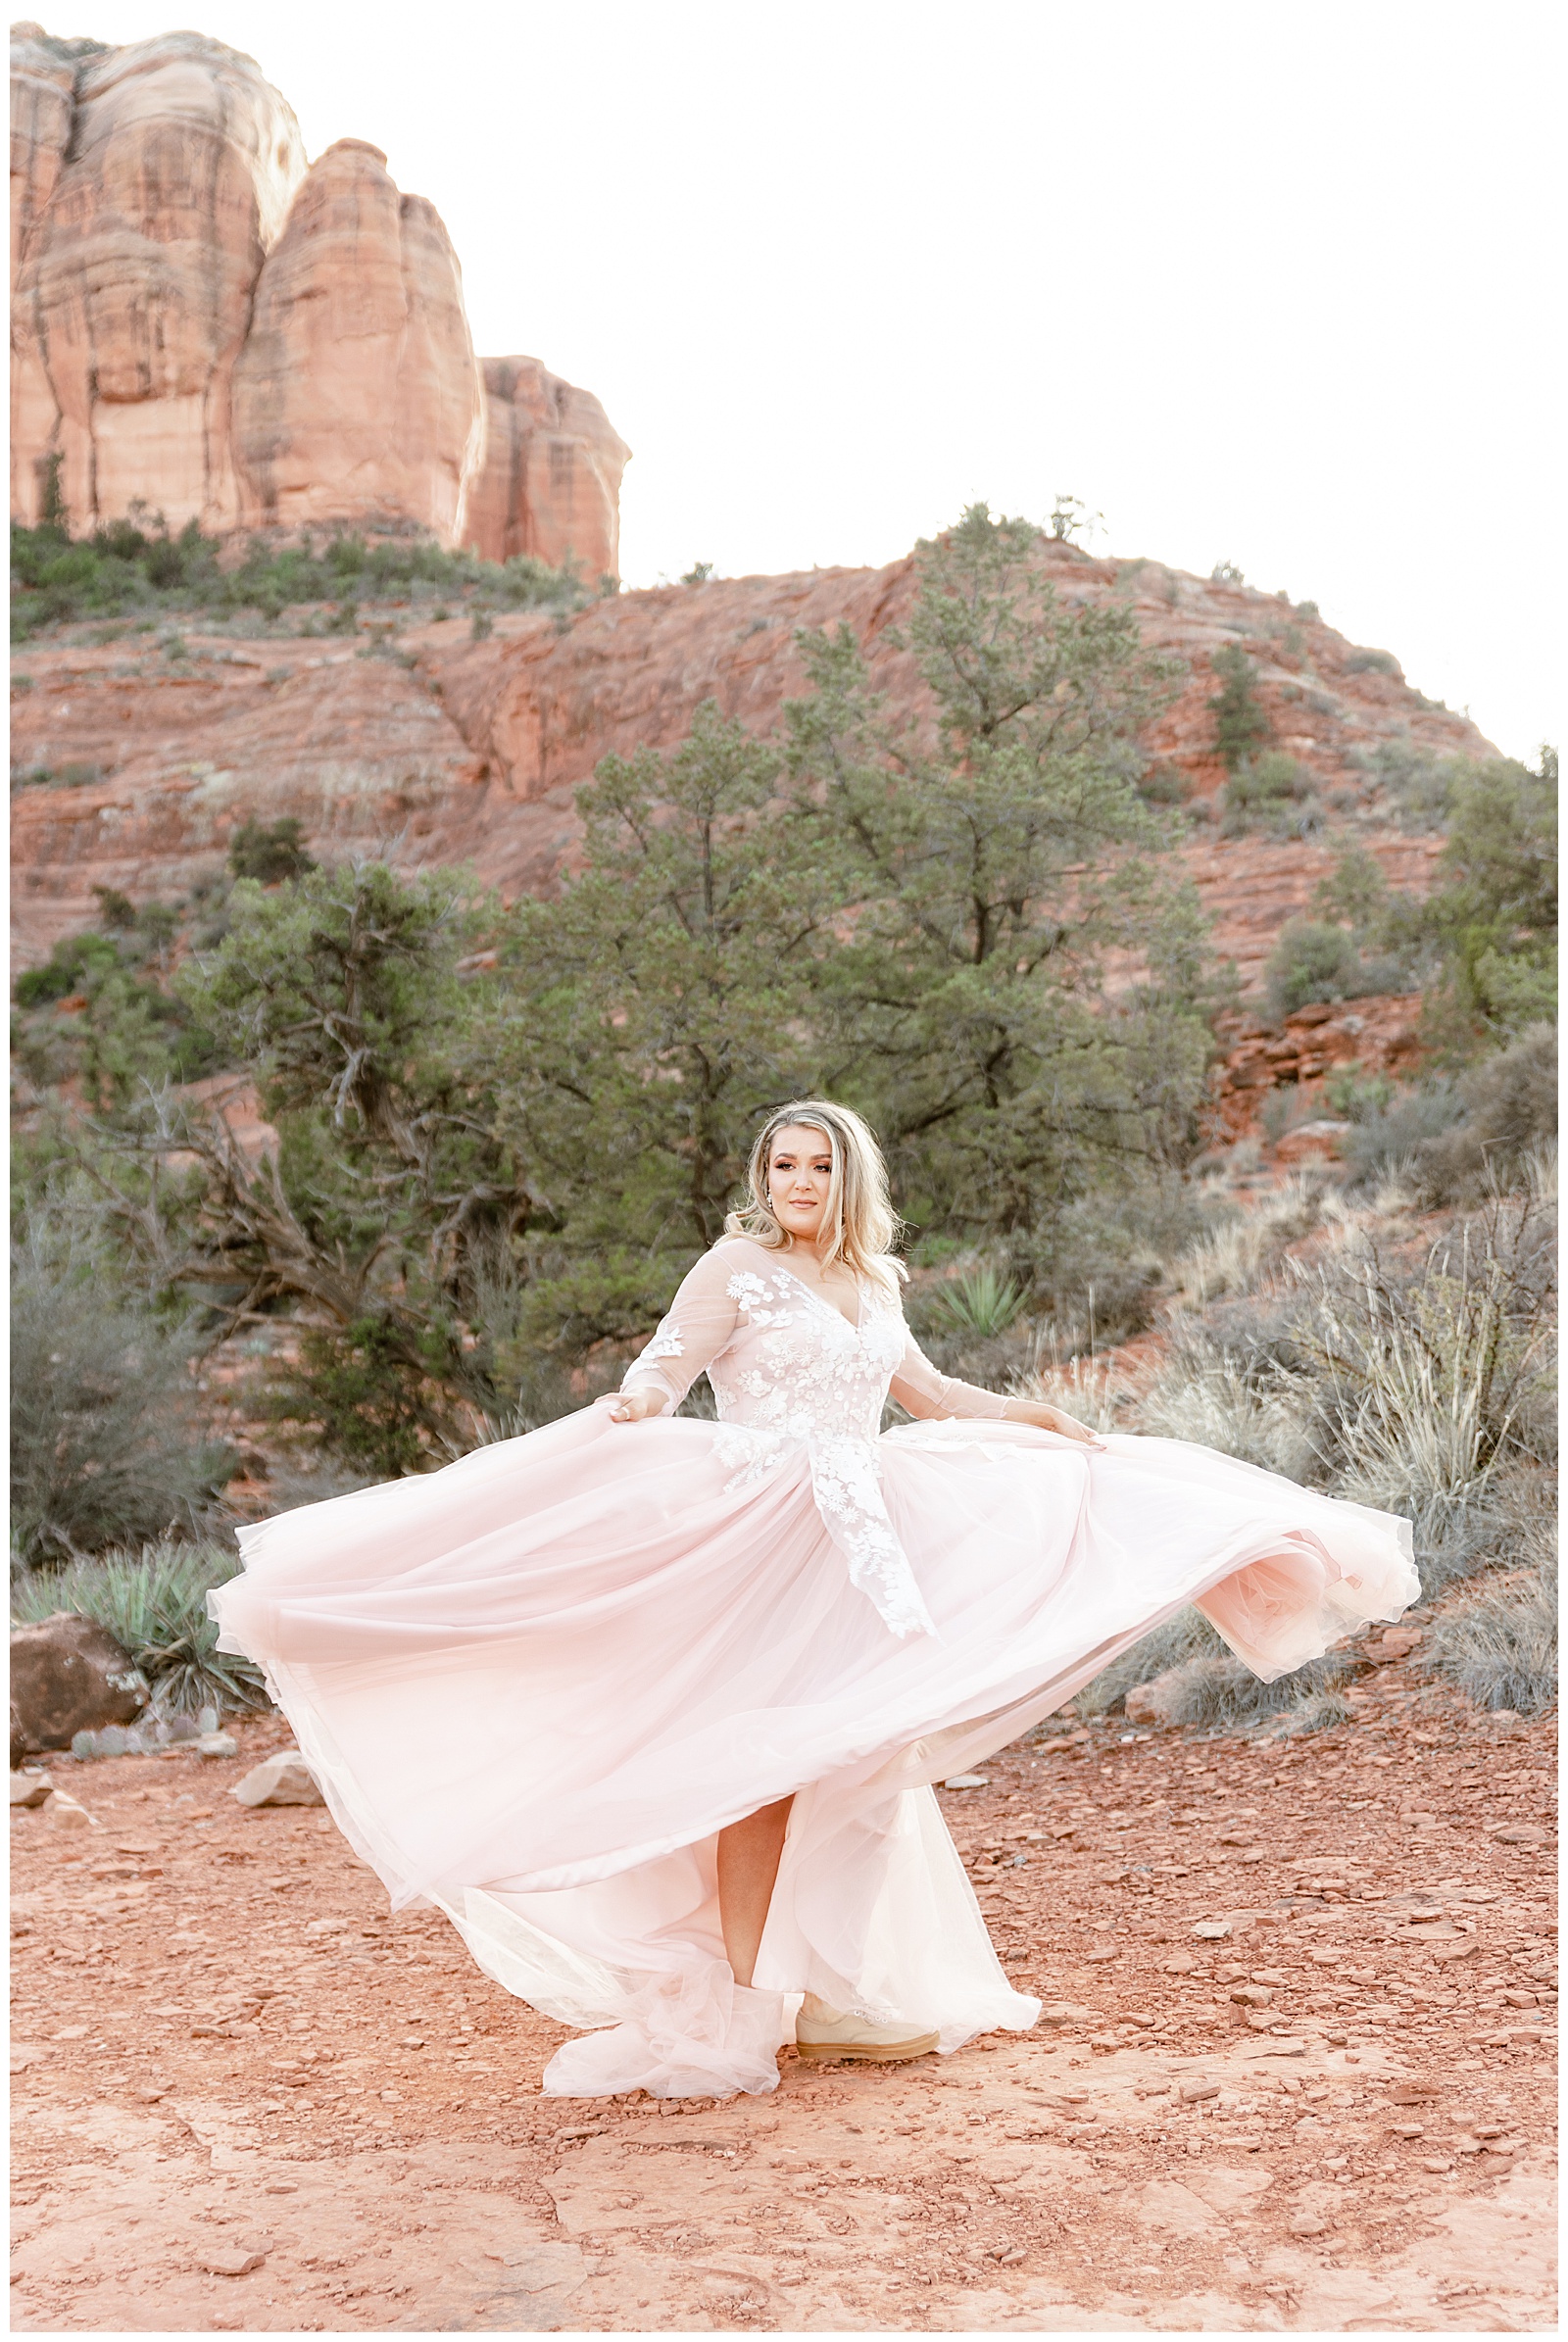 Blush colored wedding dress flows in the wind for an elopement bride